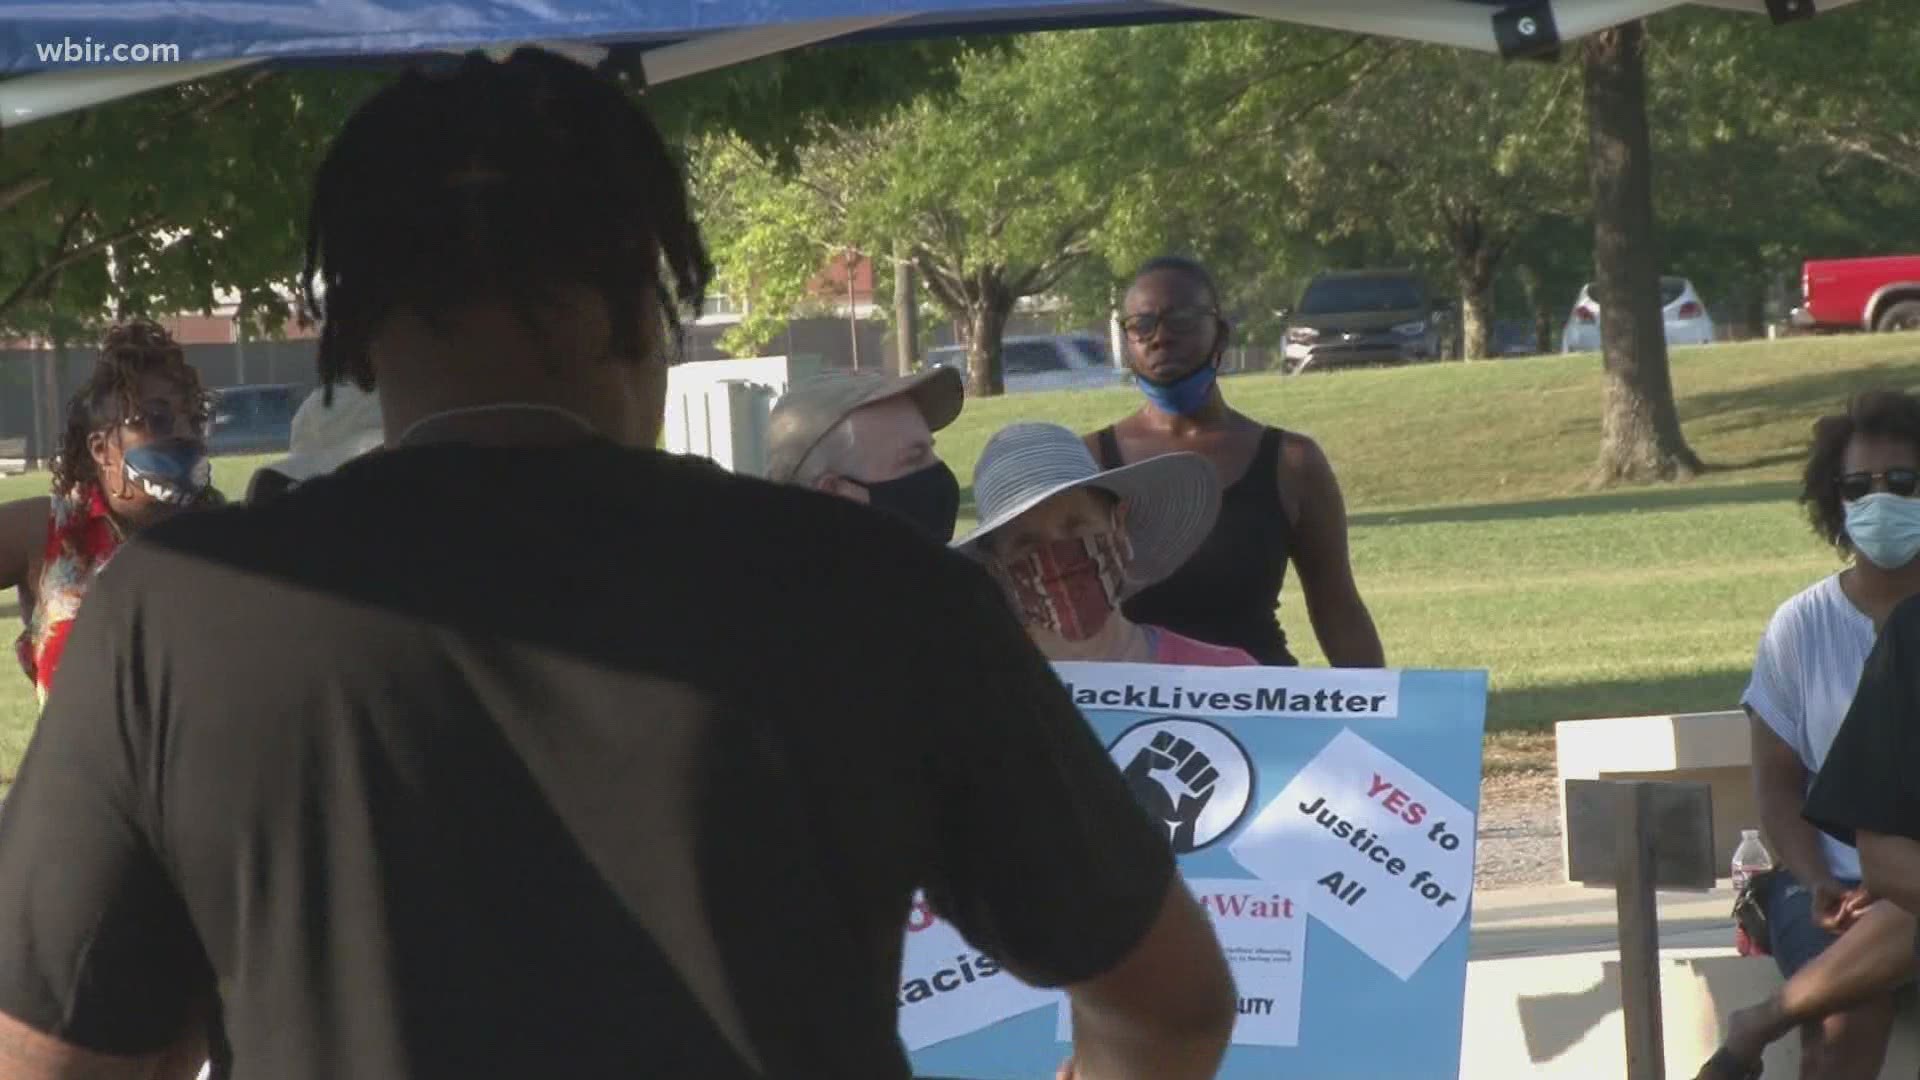 A group of activists from across East Tennessee gathered in Oak Ridge to take a stand against racial injustice.